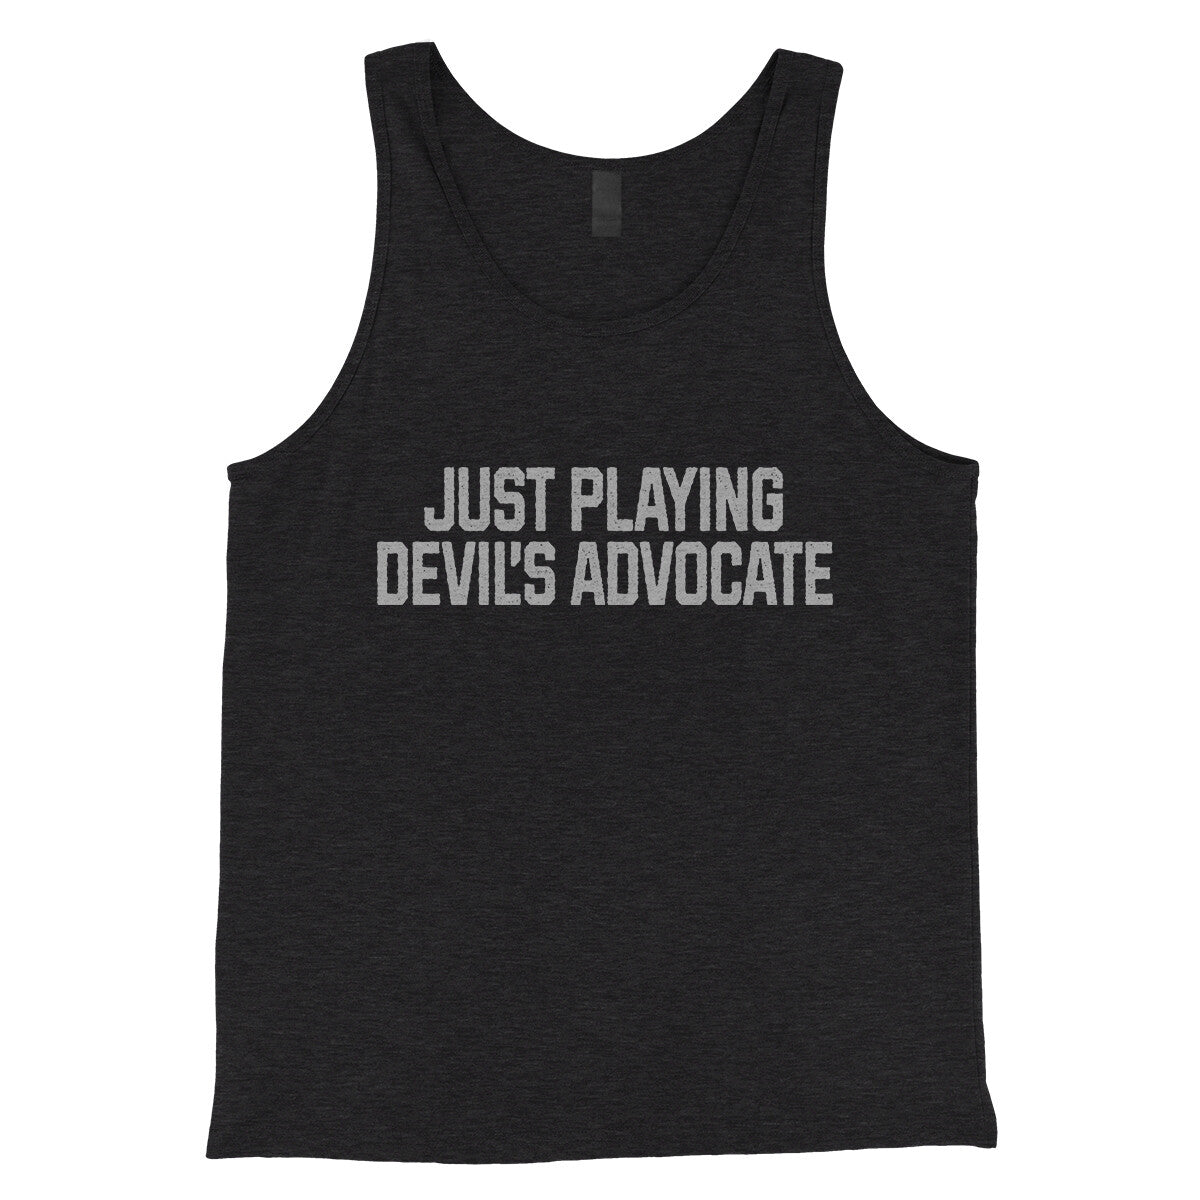 Just Playing Devil's Advocate in Charcoal Black TriBlend Color